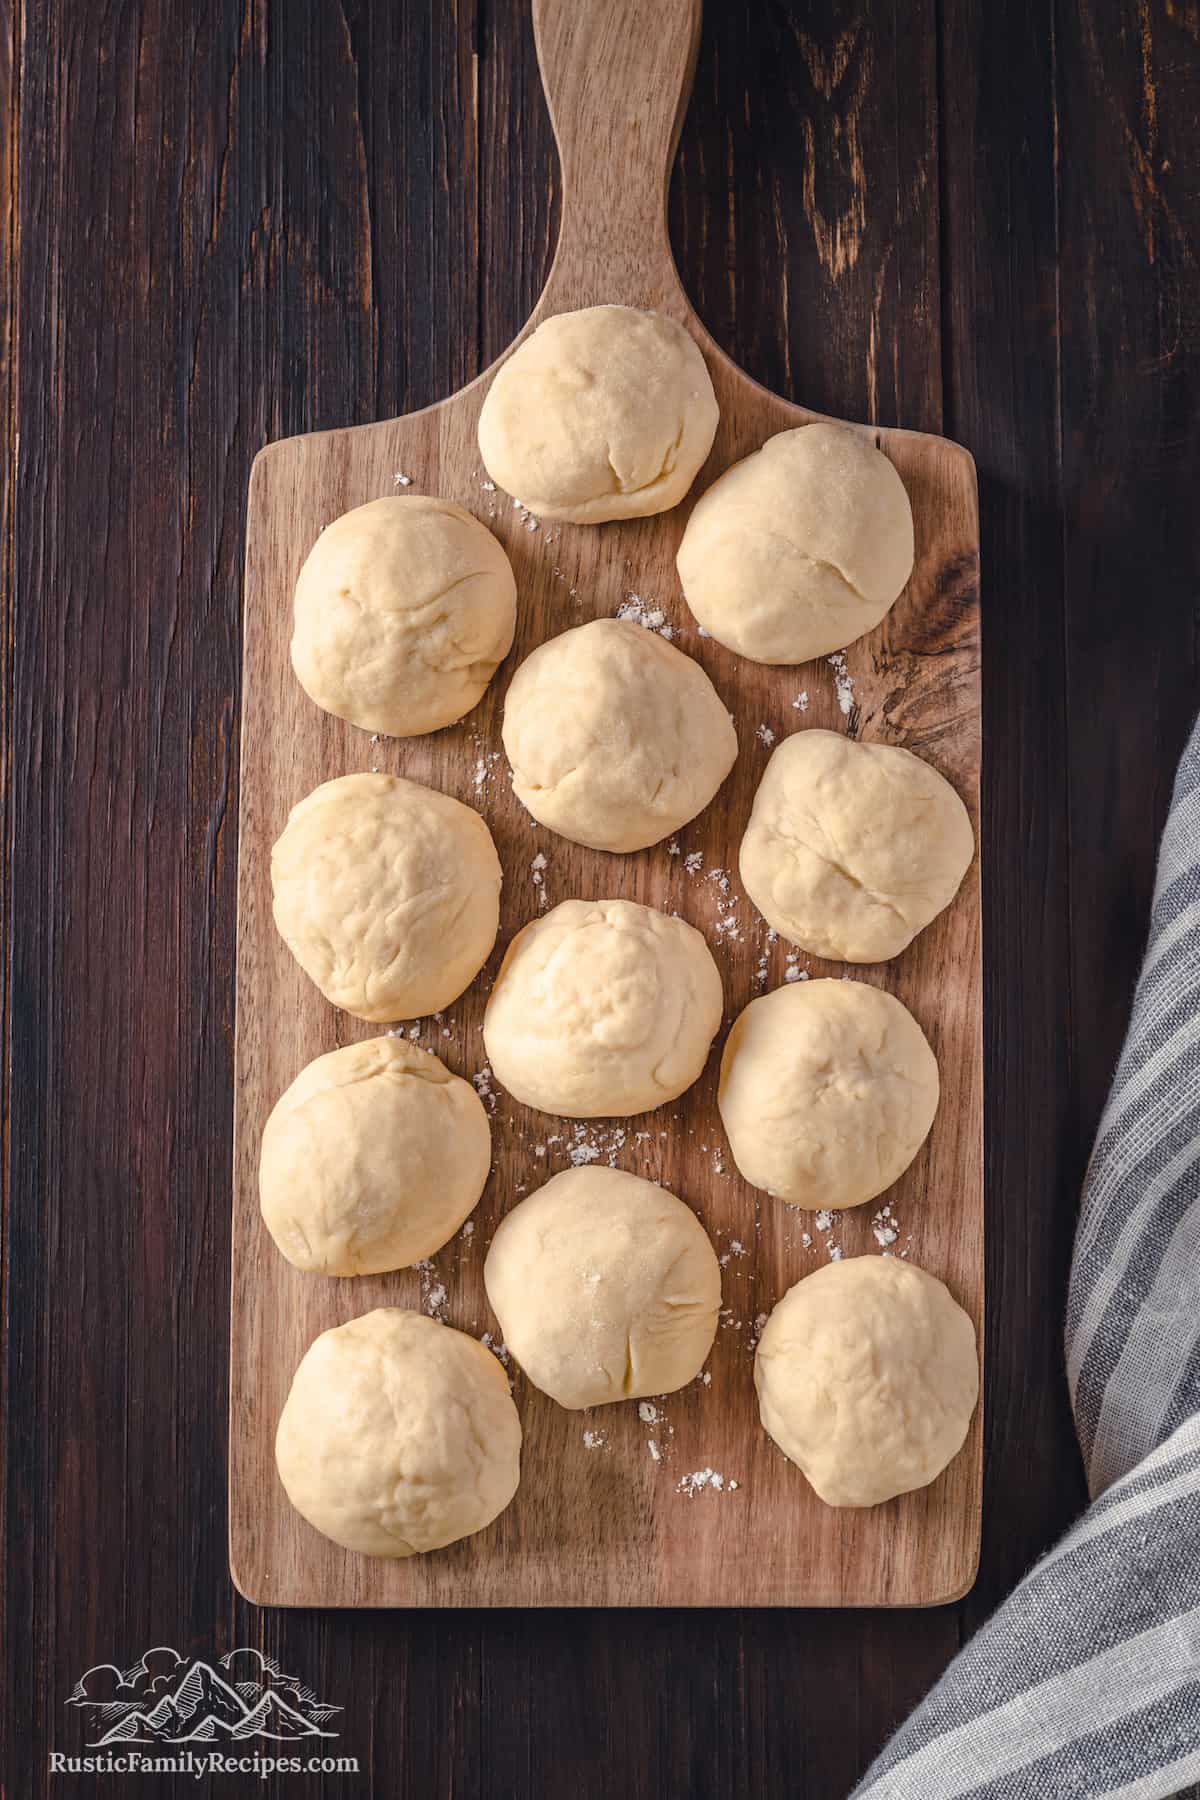 Top view of dough balls laid out on a wooden cutting board.